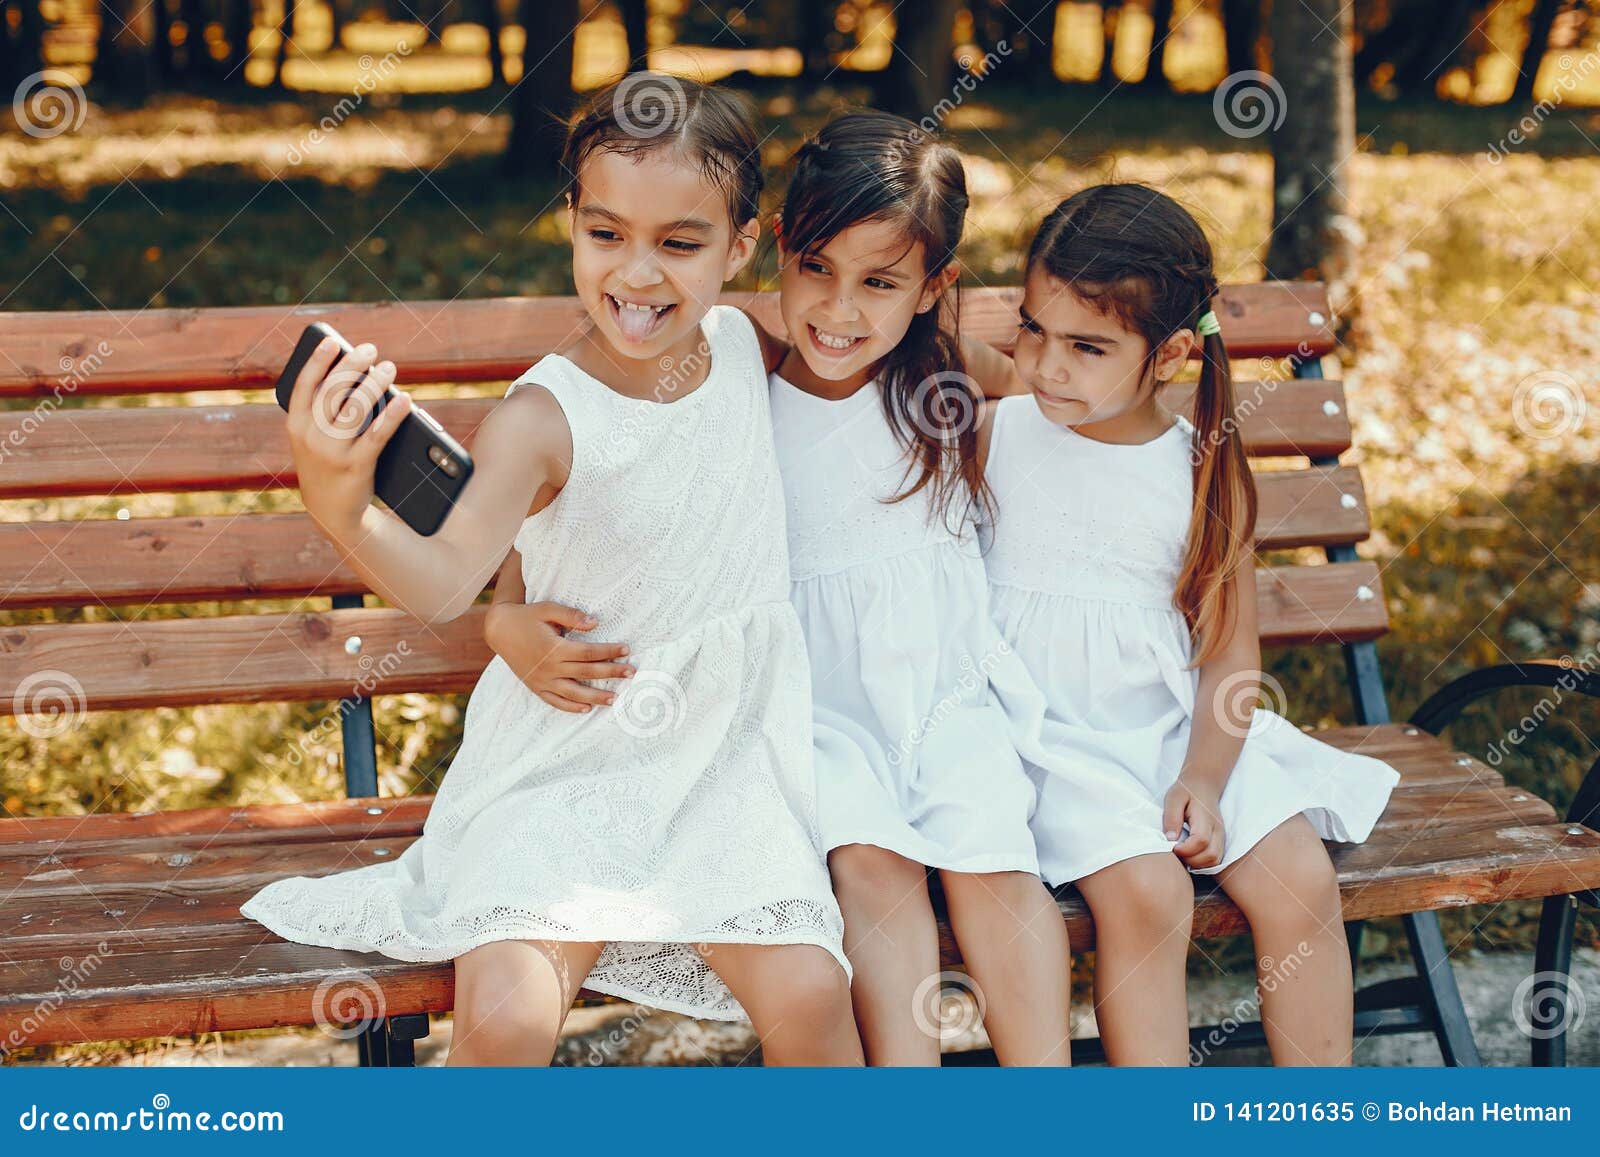 Three Little Sisters Sitting in a Summer Park Stock Image - Image of ...